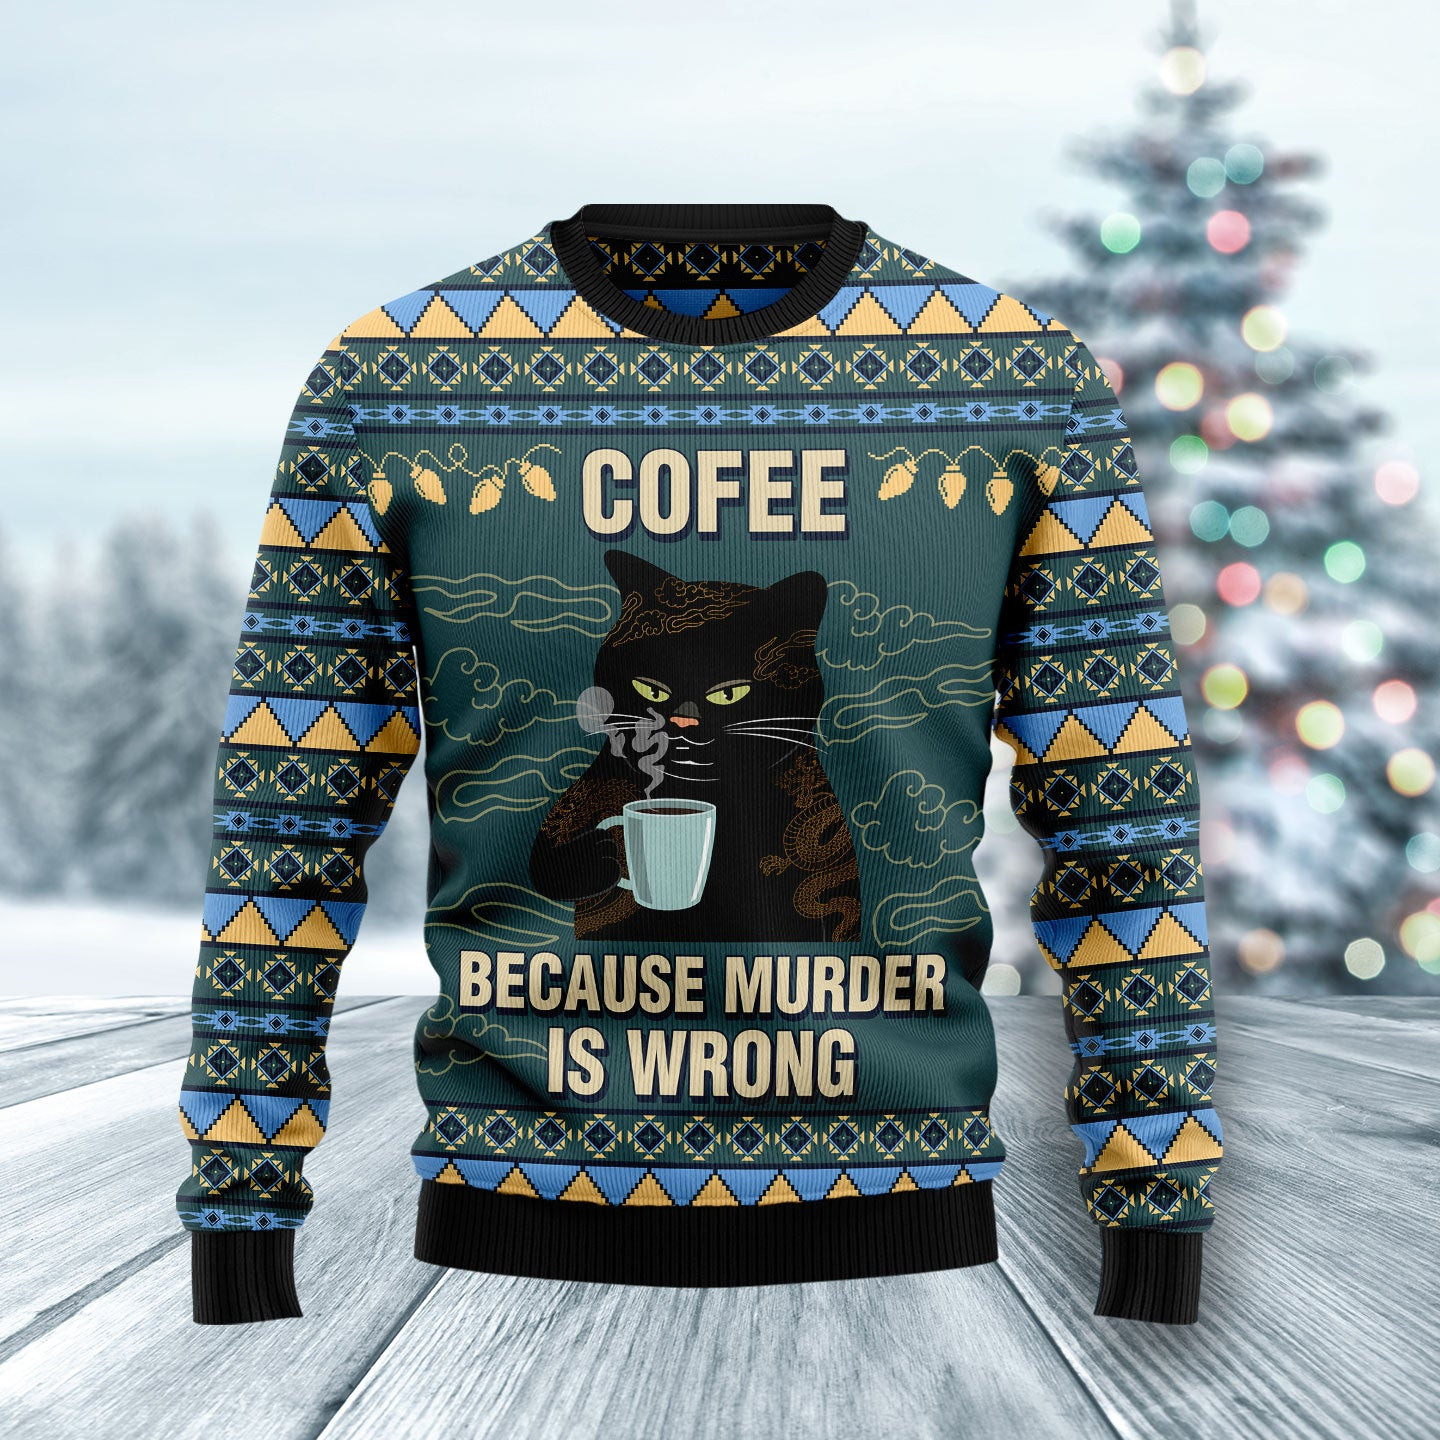 Coffee Cat Ugly Christmas Sweater, Ugly Sweater For Men Women, Holiday Sweater